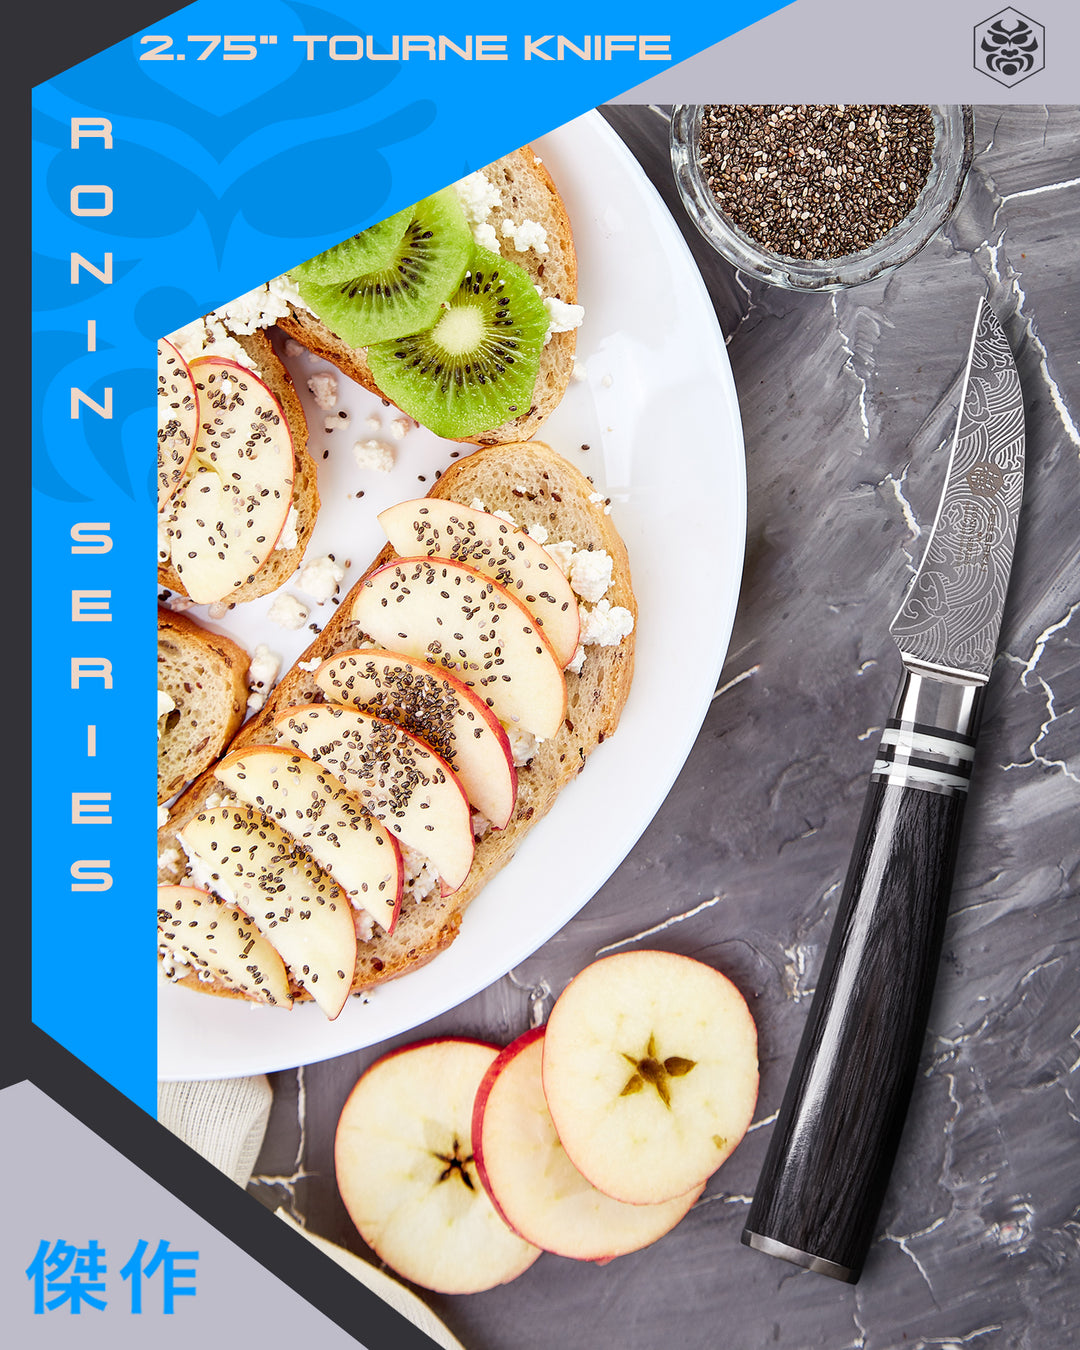 The Ronin Tourne Knife with sliced apples and kiwi on toast with feta